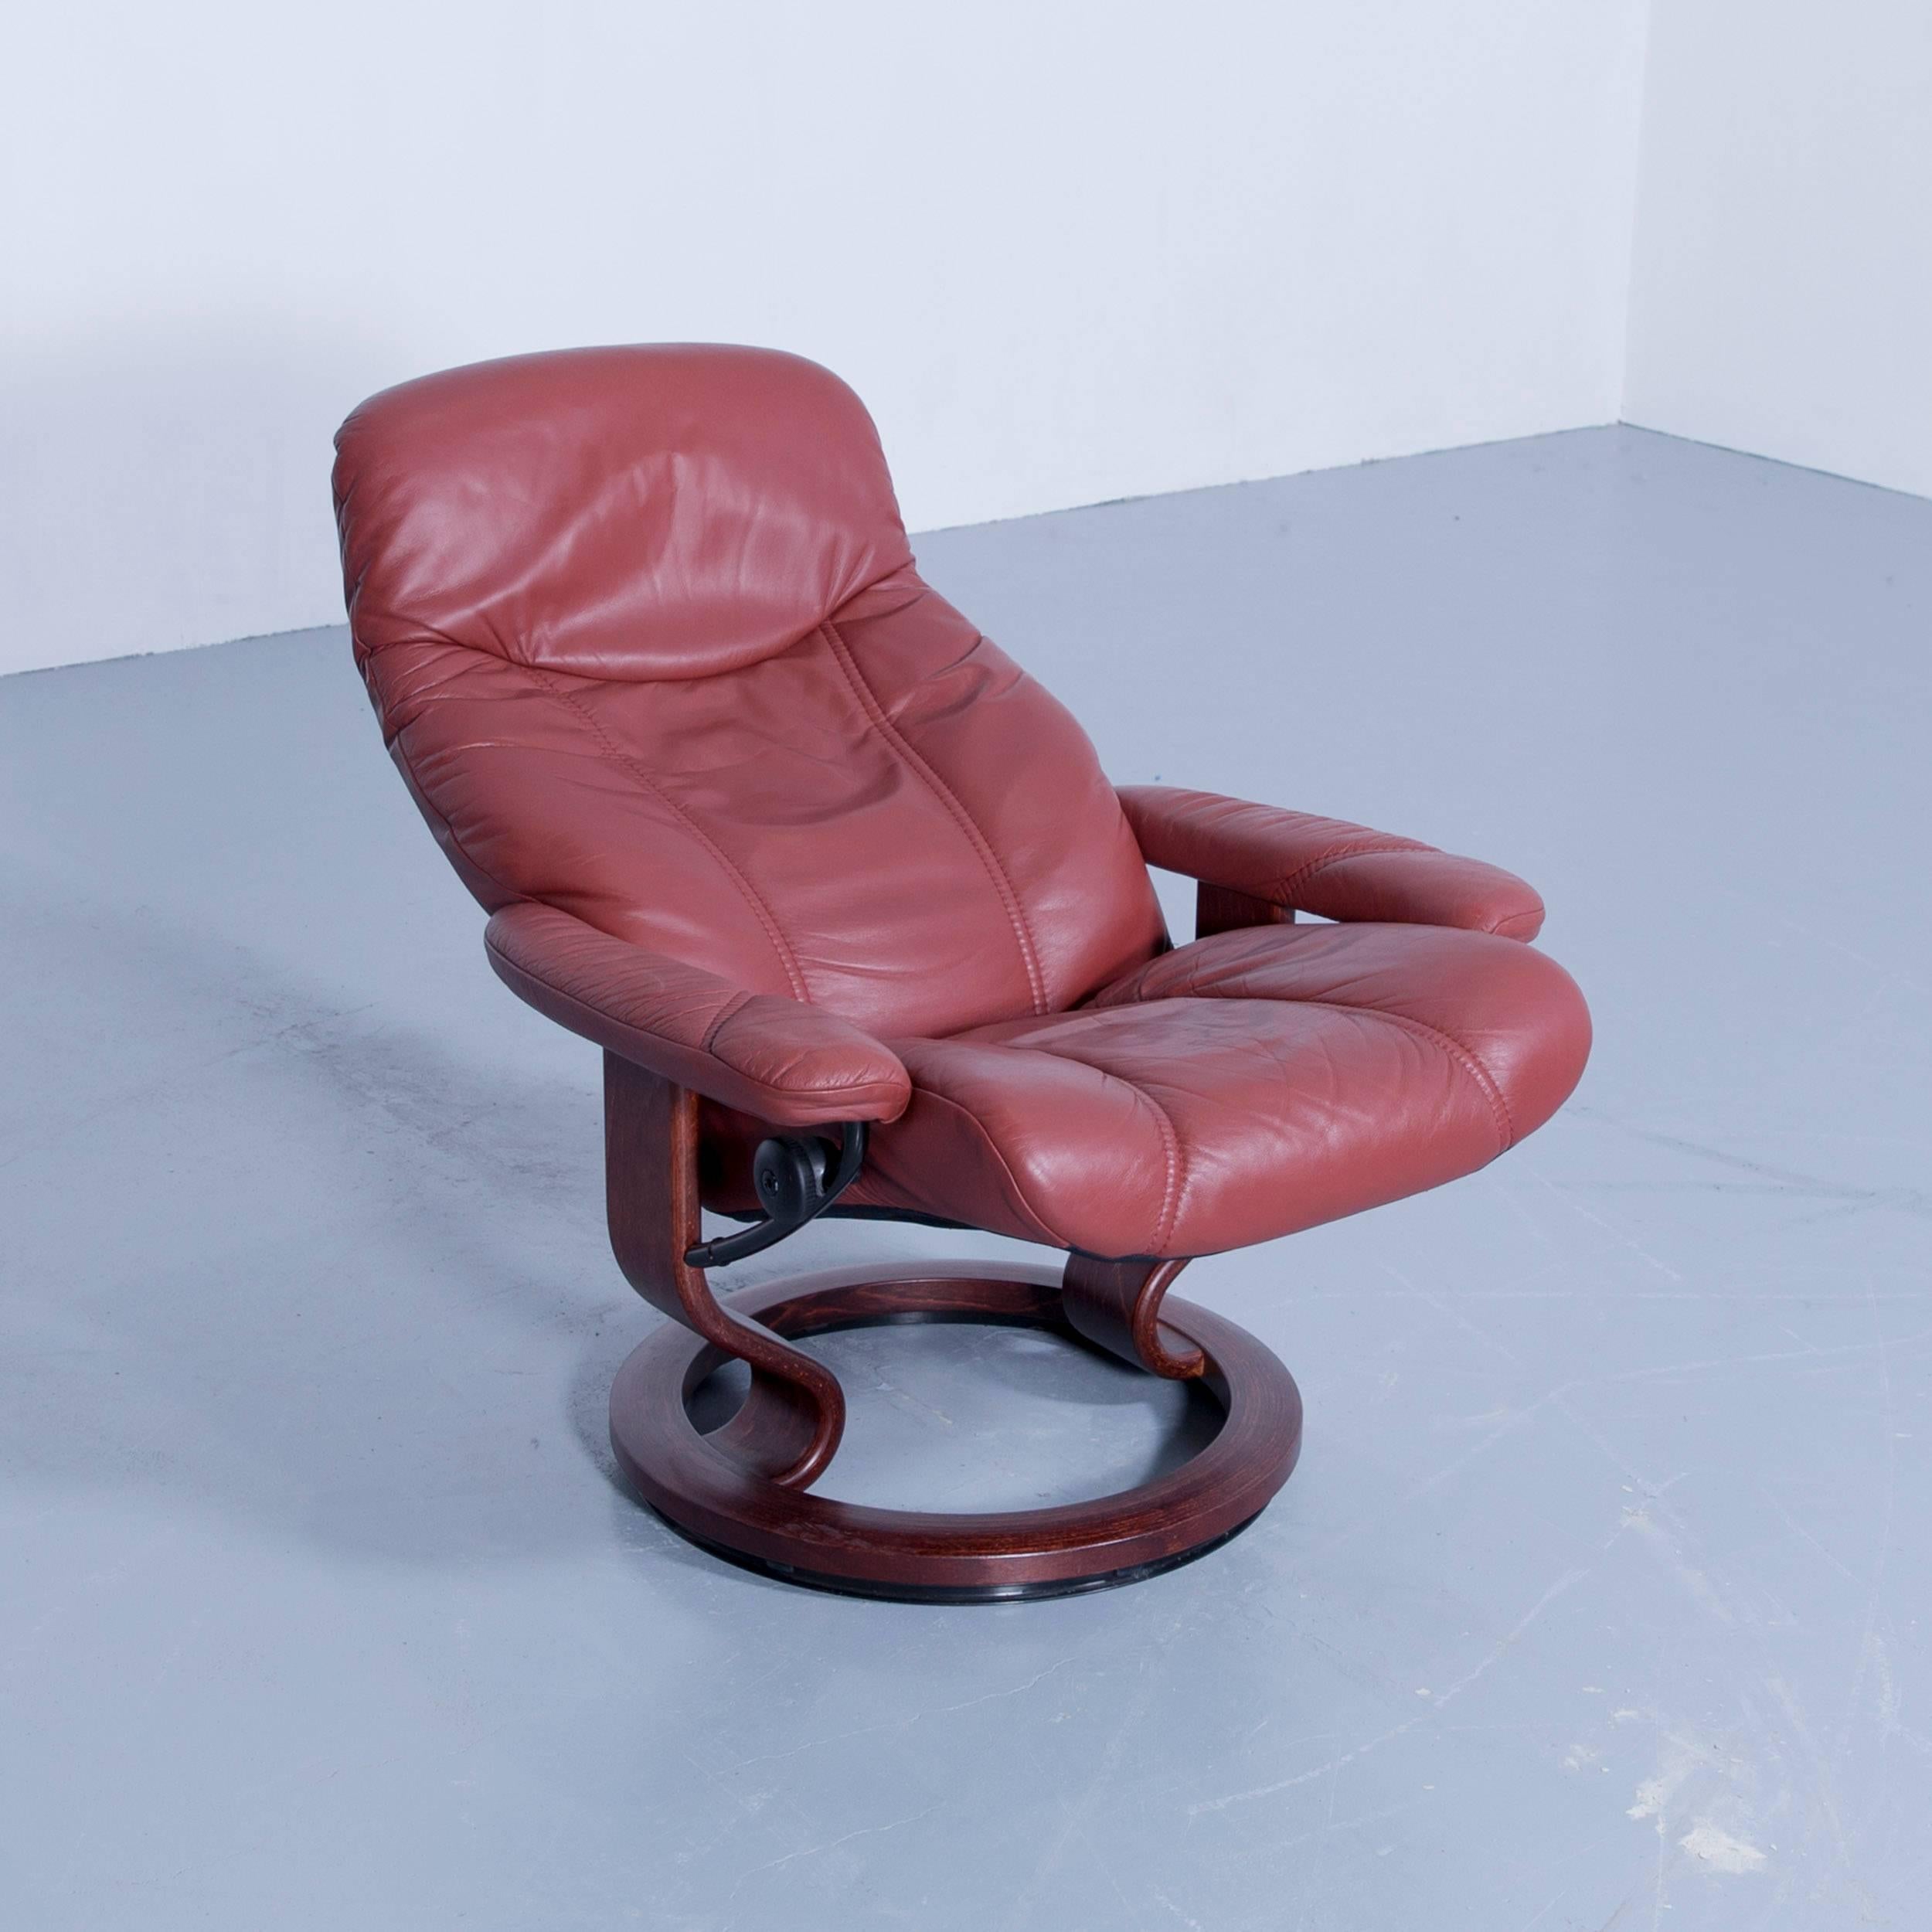 German Stressless Consul M Chair Set Incl. Stool Leather Red Brown Relax Function Couch